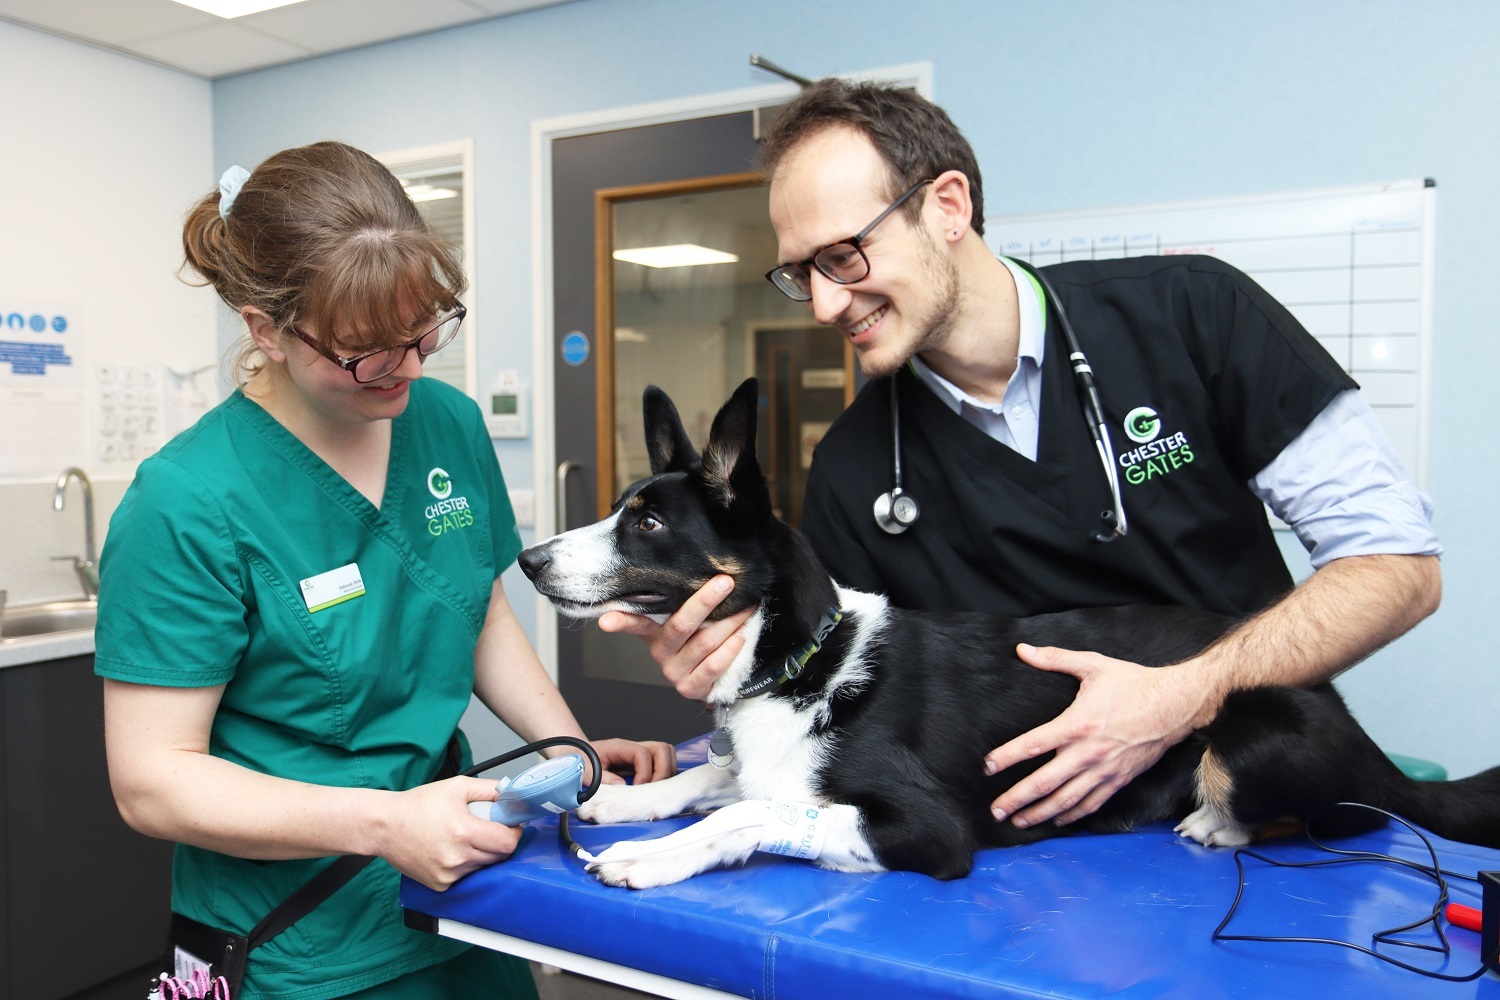 The team at Chestergates Veterinary Specialists will be providing a new service for puppies and kittens unique in the North West.